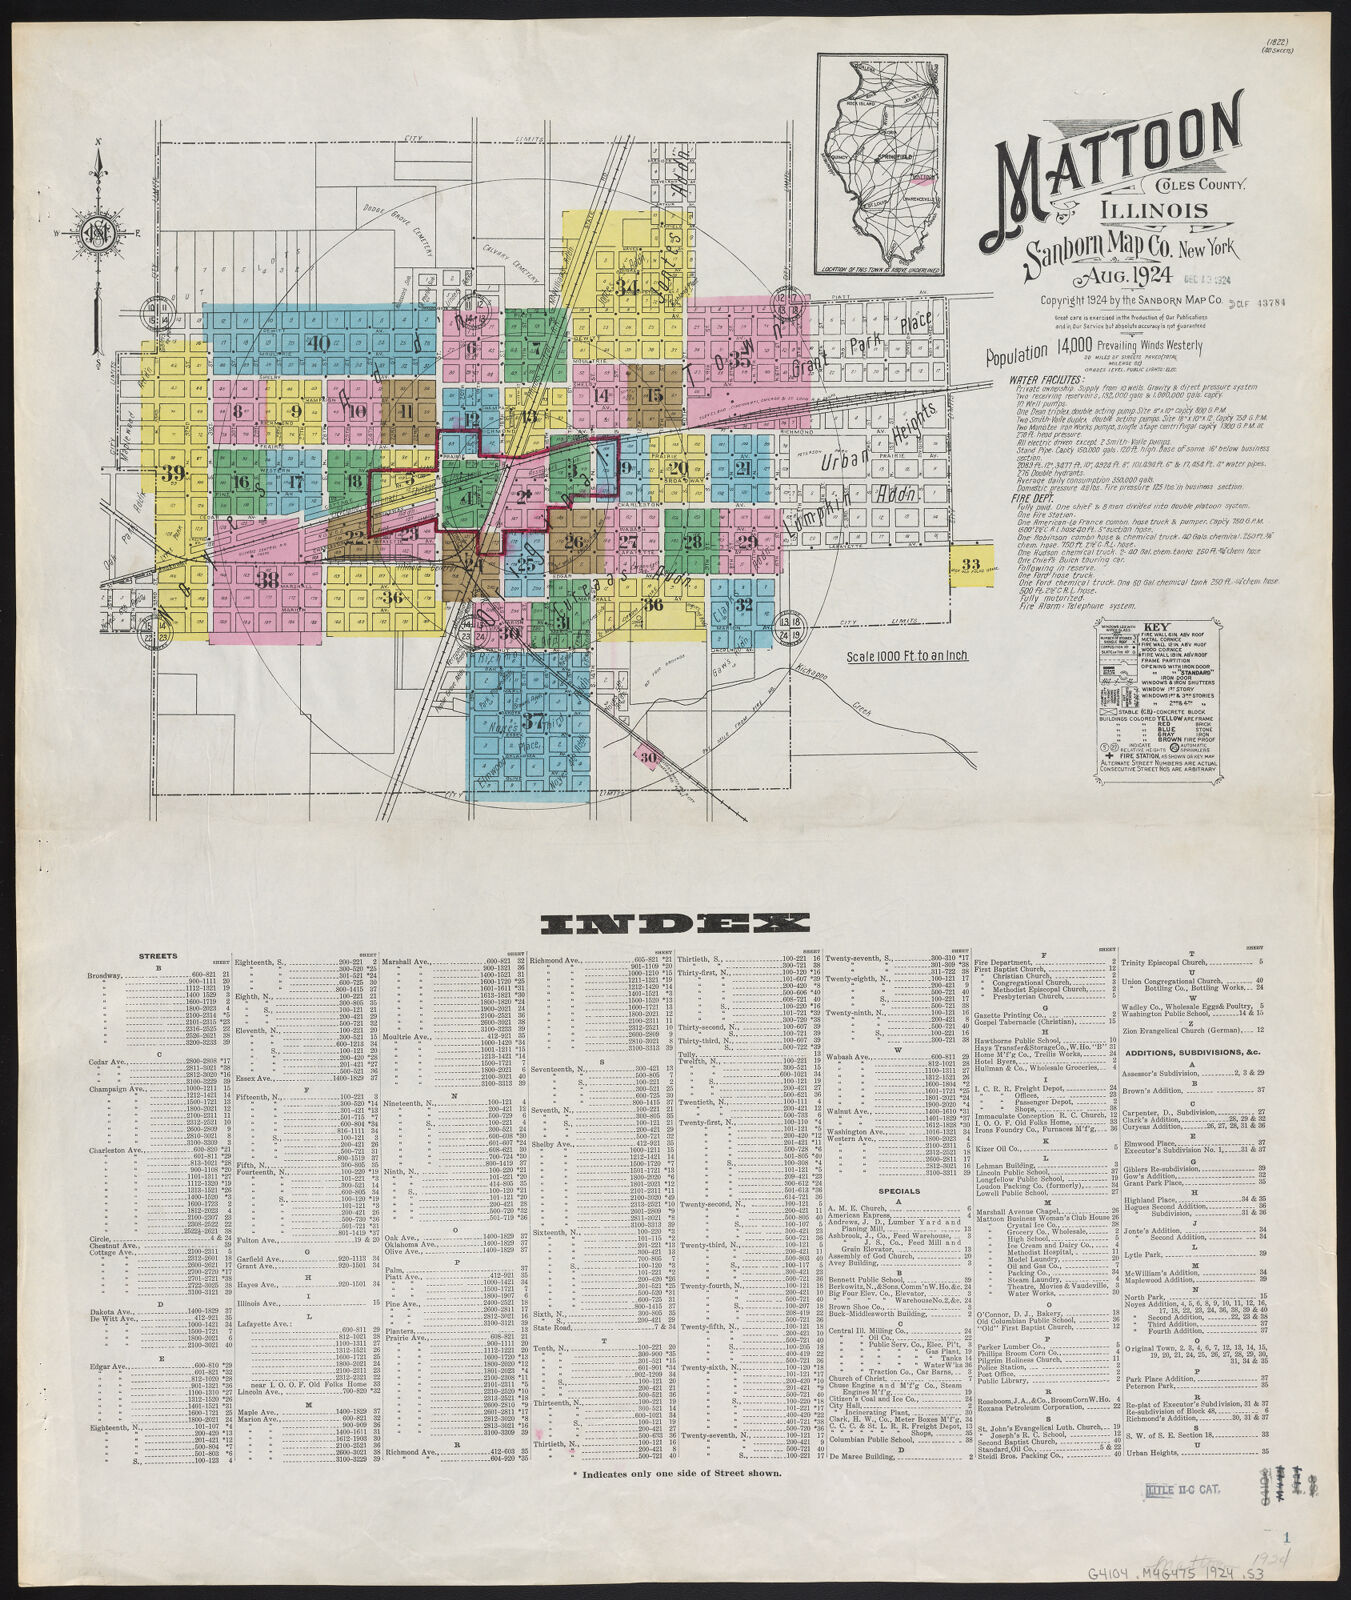 Mattoon Coles County Illinois Aug 1924 Digital Collections At The